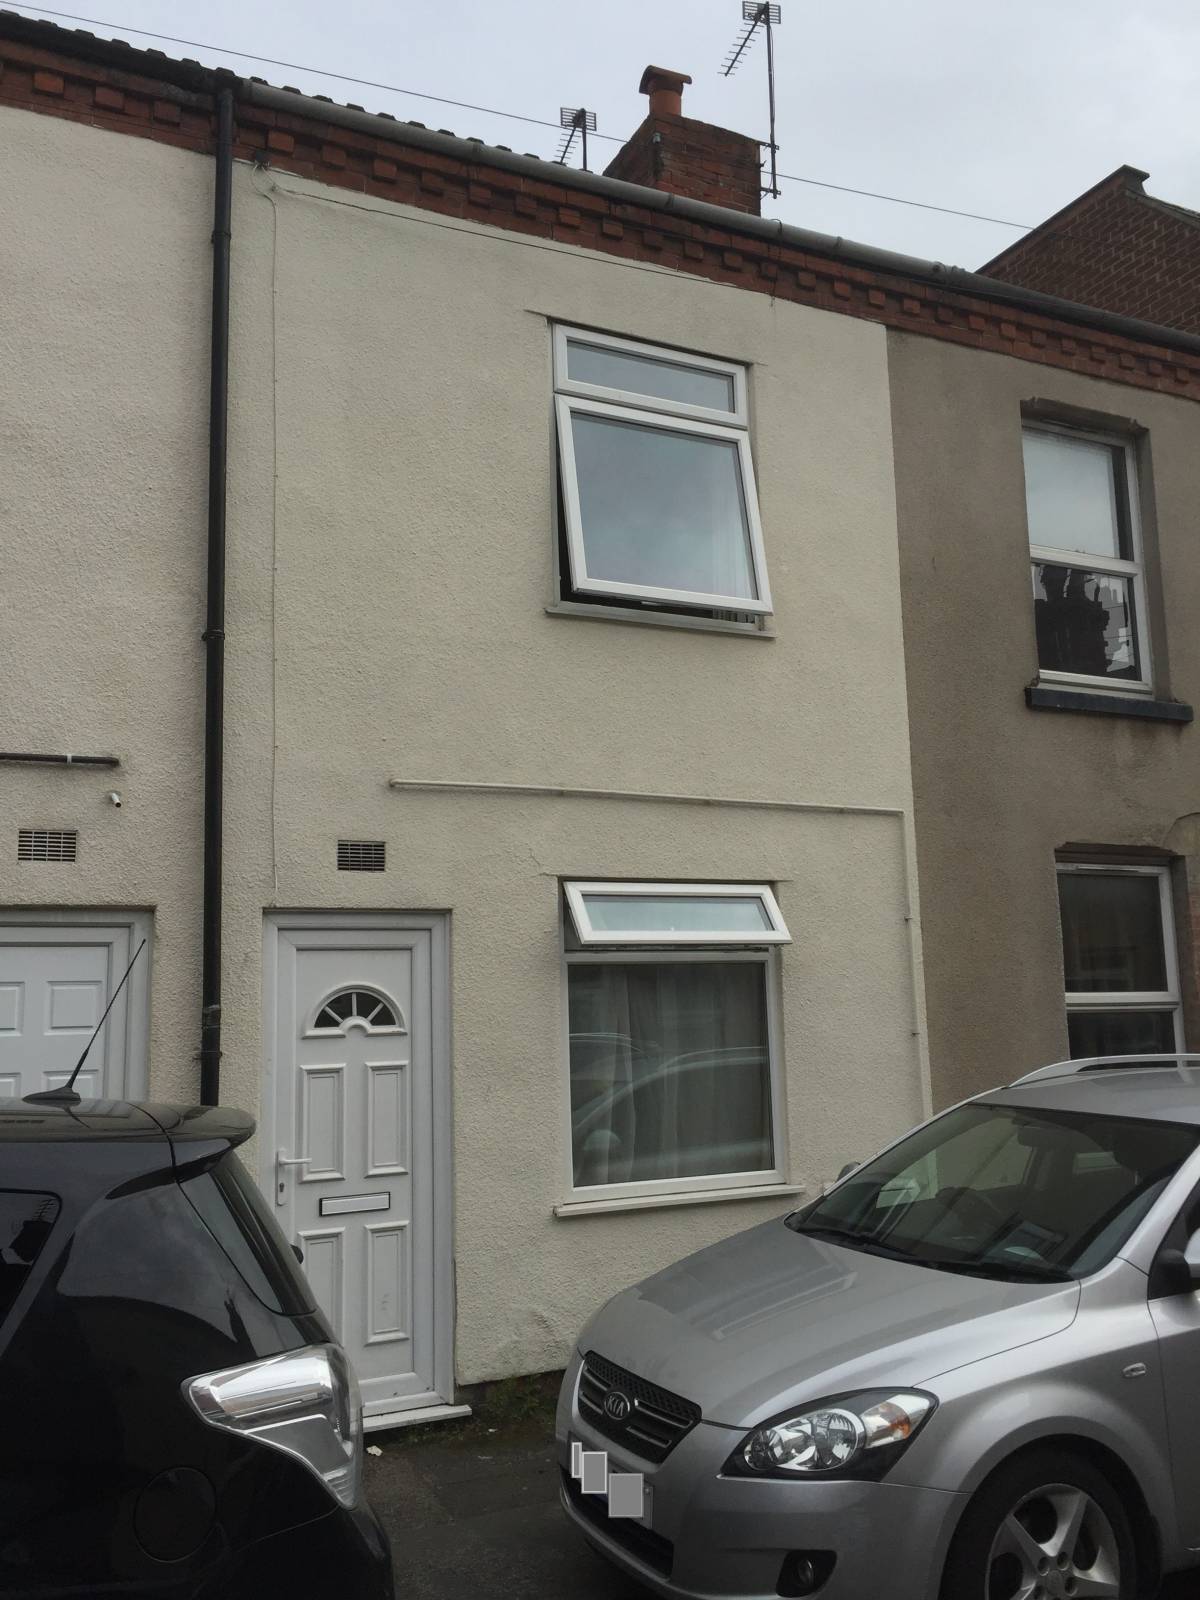 ** IDEAL FAMILY HOME / STARTER HOME ** 2 Double Bedroom. 2 Reception. Double Glazed. Garden. Fully reburbished decoration. New carpets to x2 reception rooms & stairs.